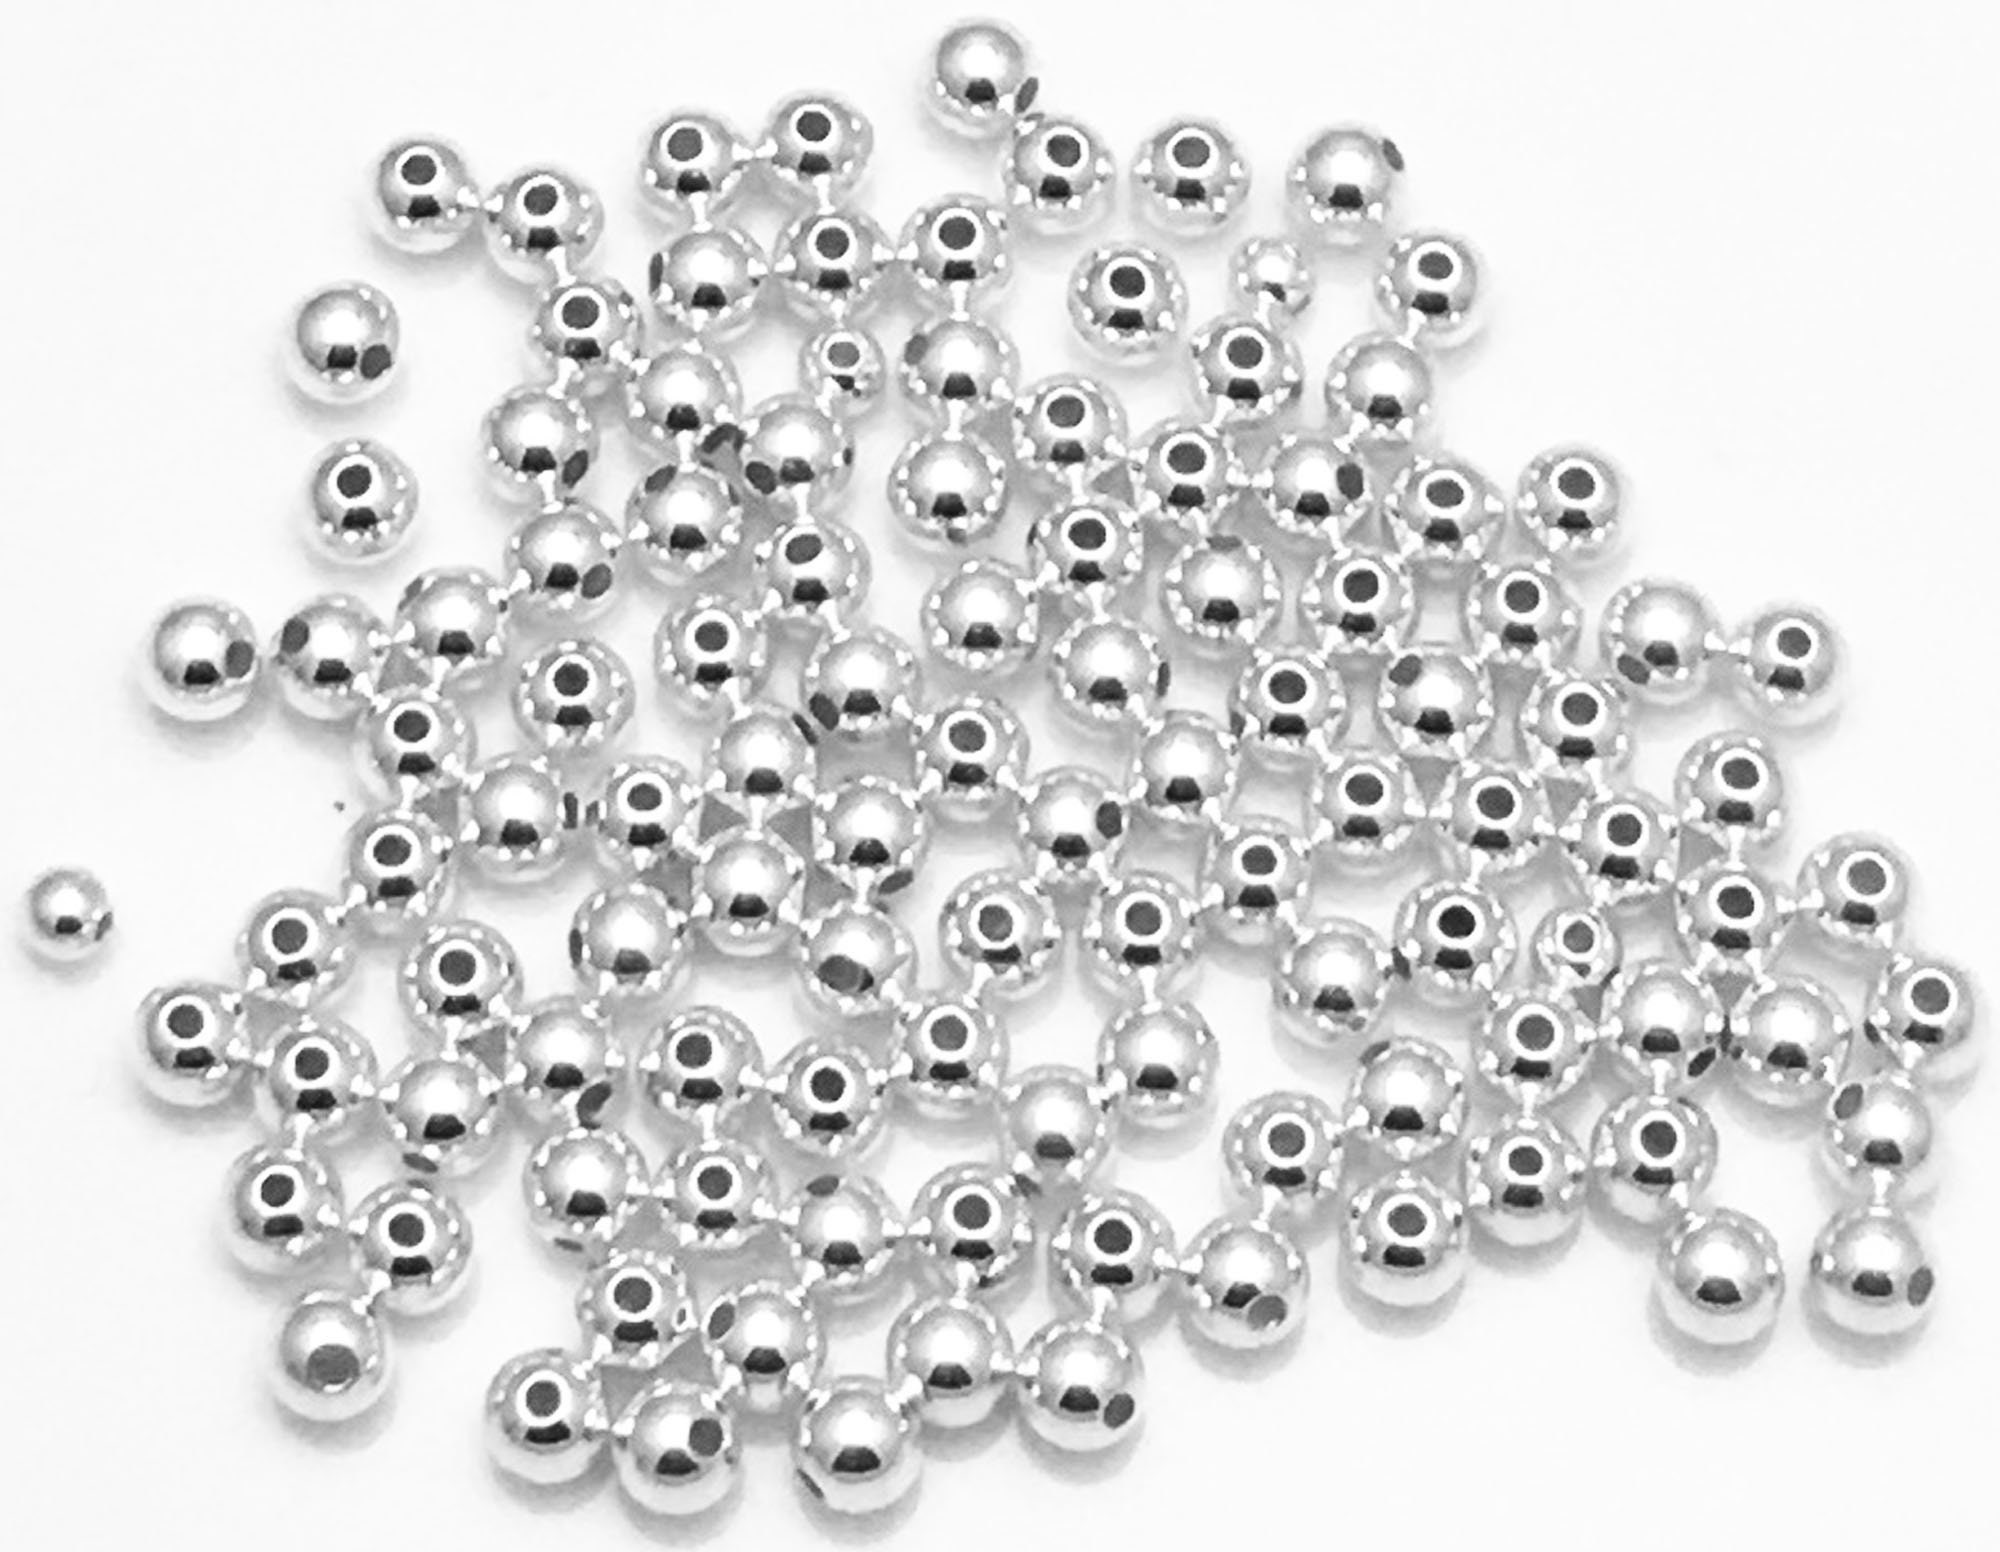 4mm Silver Round Cast Metal Spacer Beads 25pc by hildie & jo